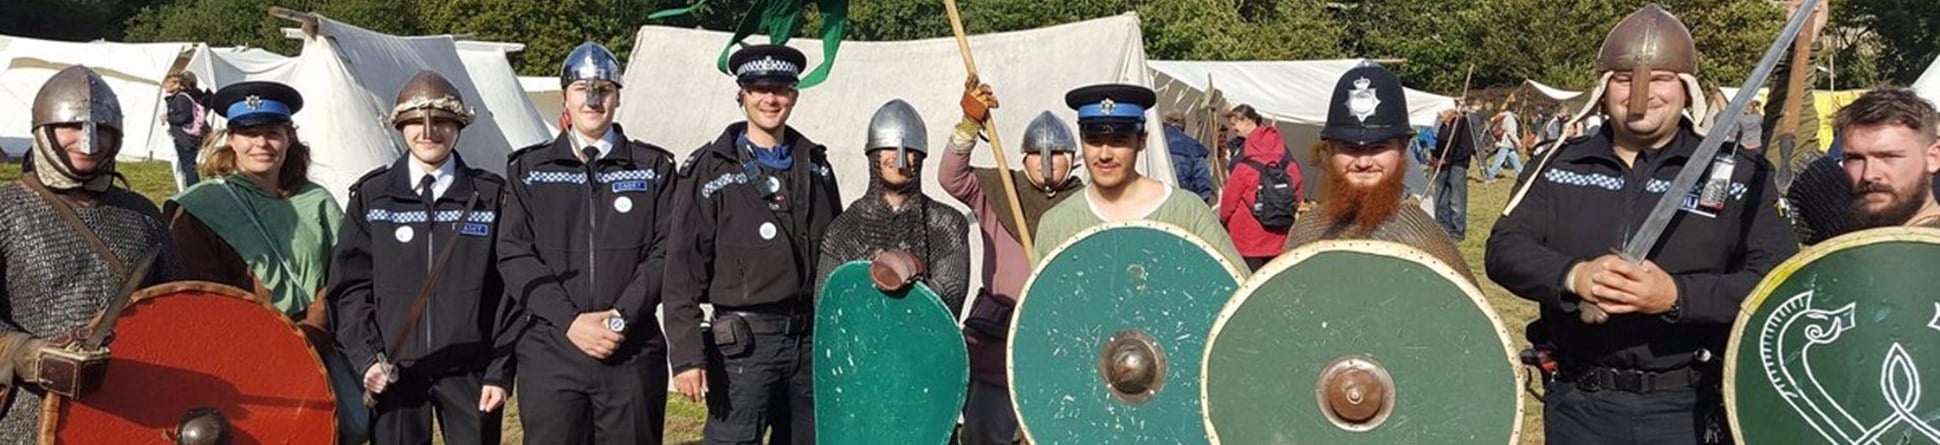 Image of police engaging with a re-enactment group dressed in Anglo-Saxon costume.